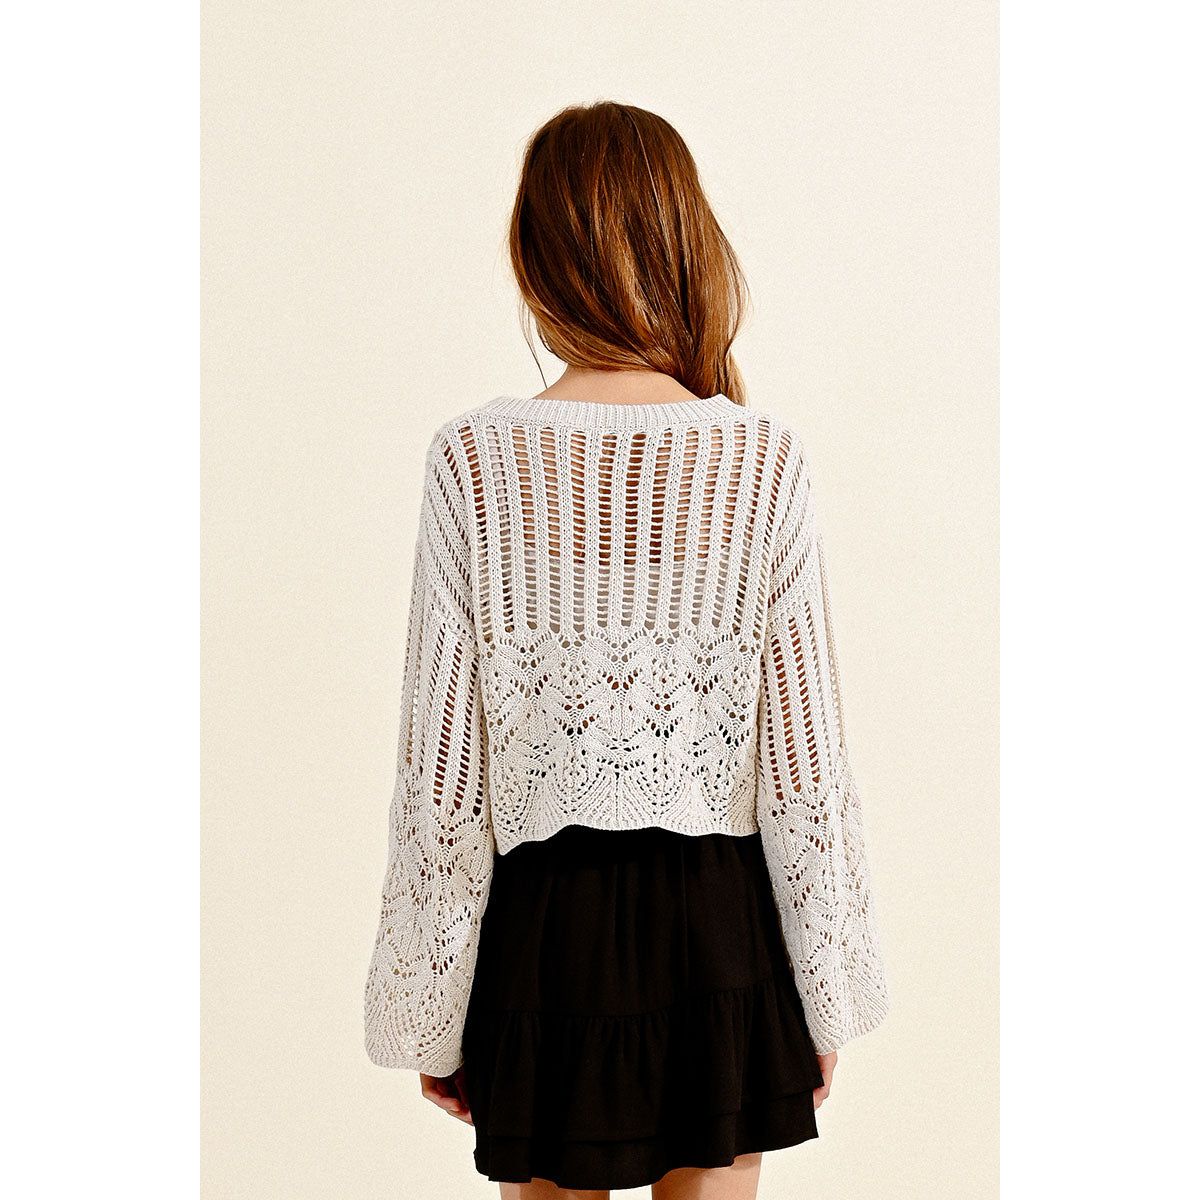 Molly Bracken - Knitted Sweater in Creme